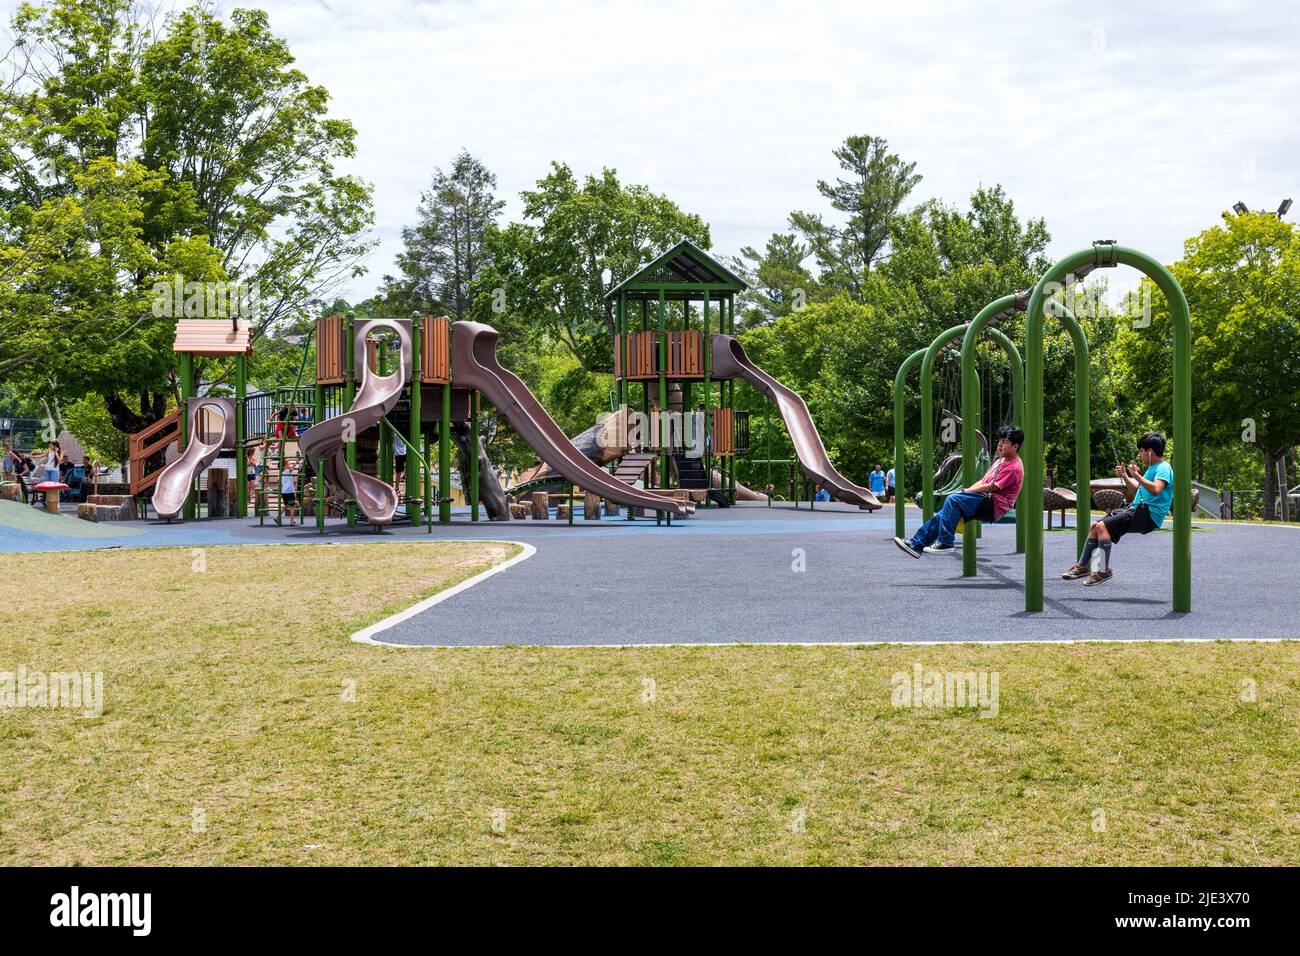 BLOWING ROCK, NC, USA-20 JUNE 2022: Playground in City Park, two boys play on swings, playground equipment and children in background. Stock Photo